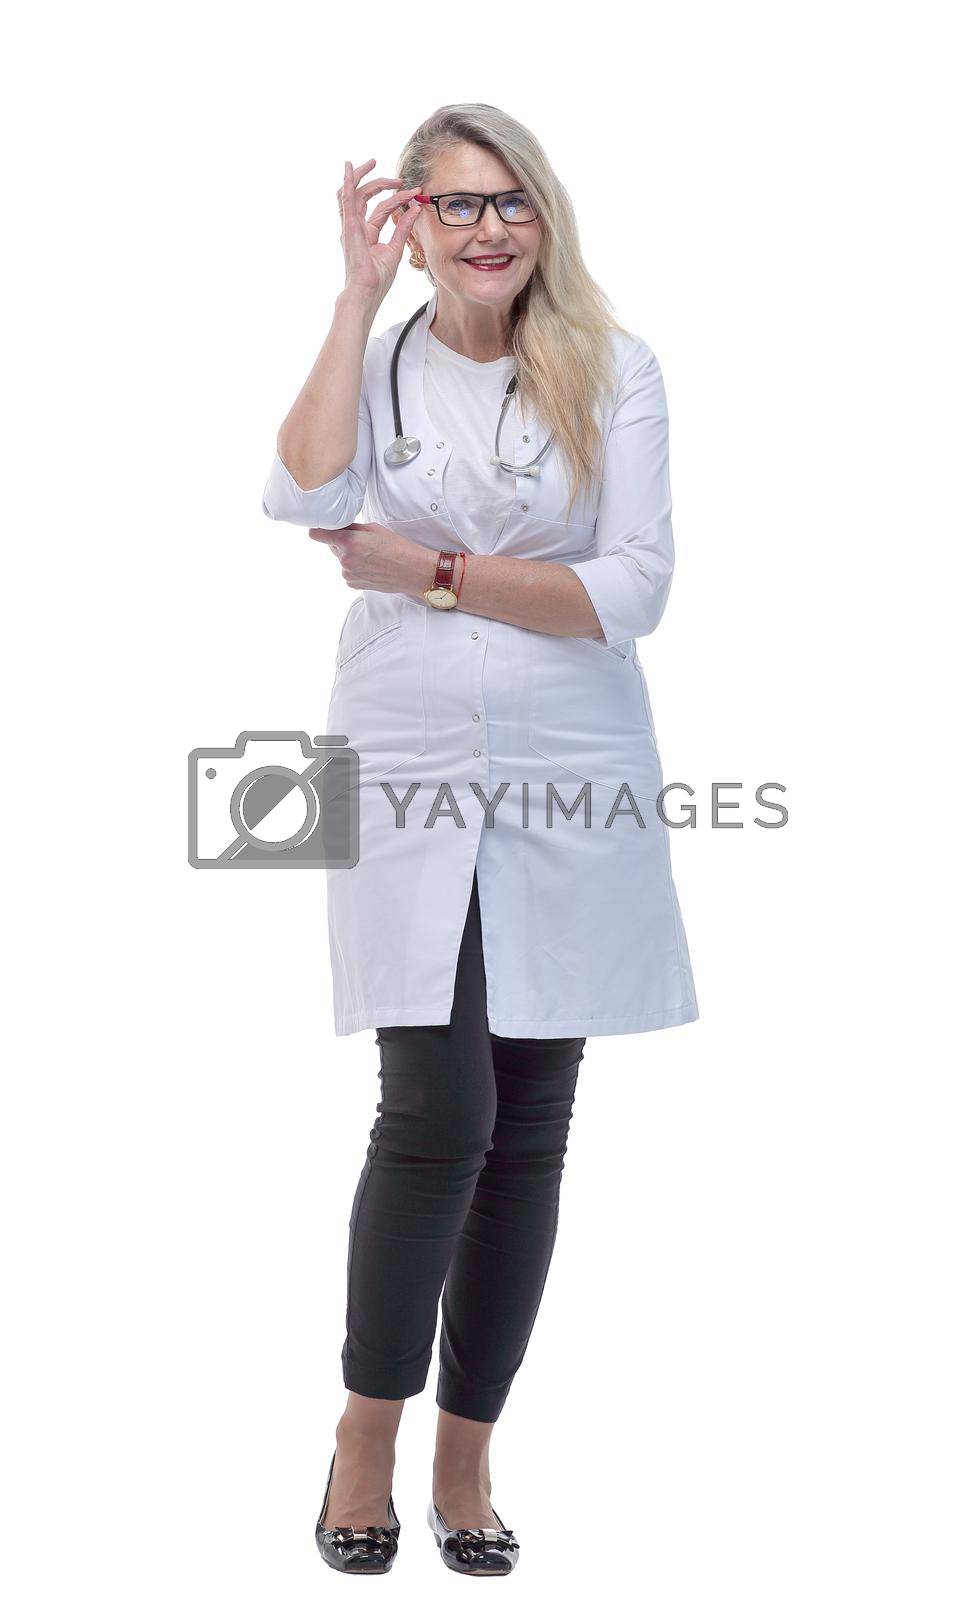 Royalty free image of in full growth. happy medic woman talking on her smartphone by asdf